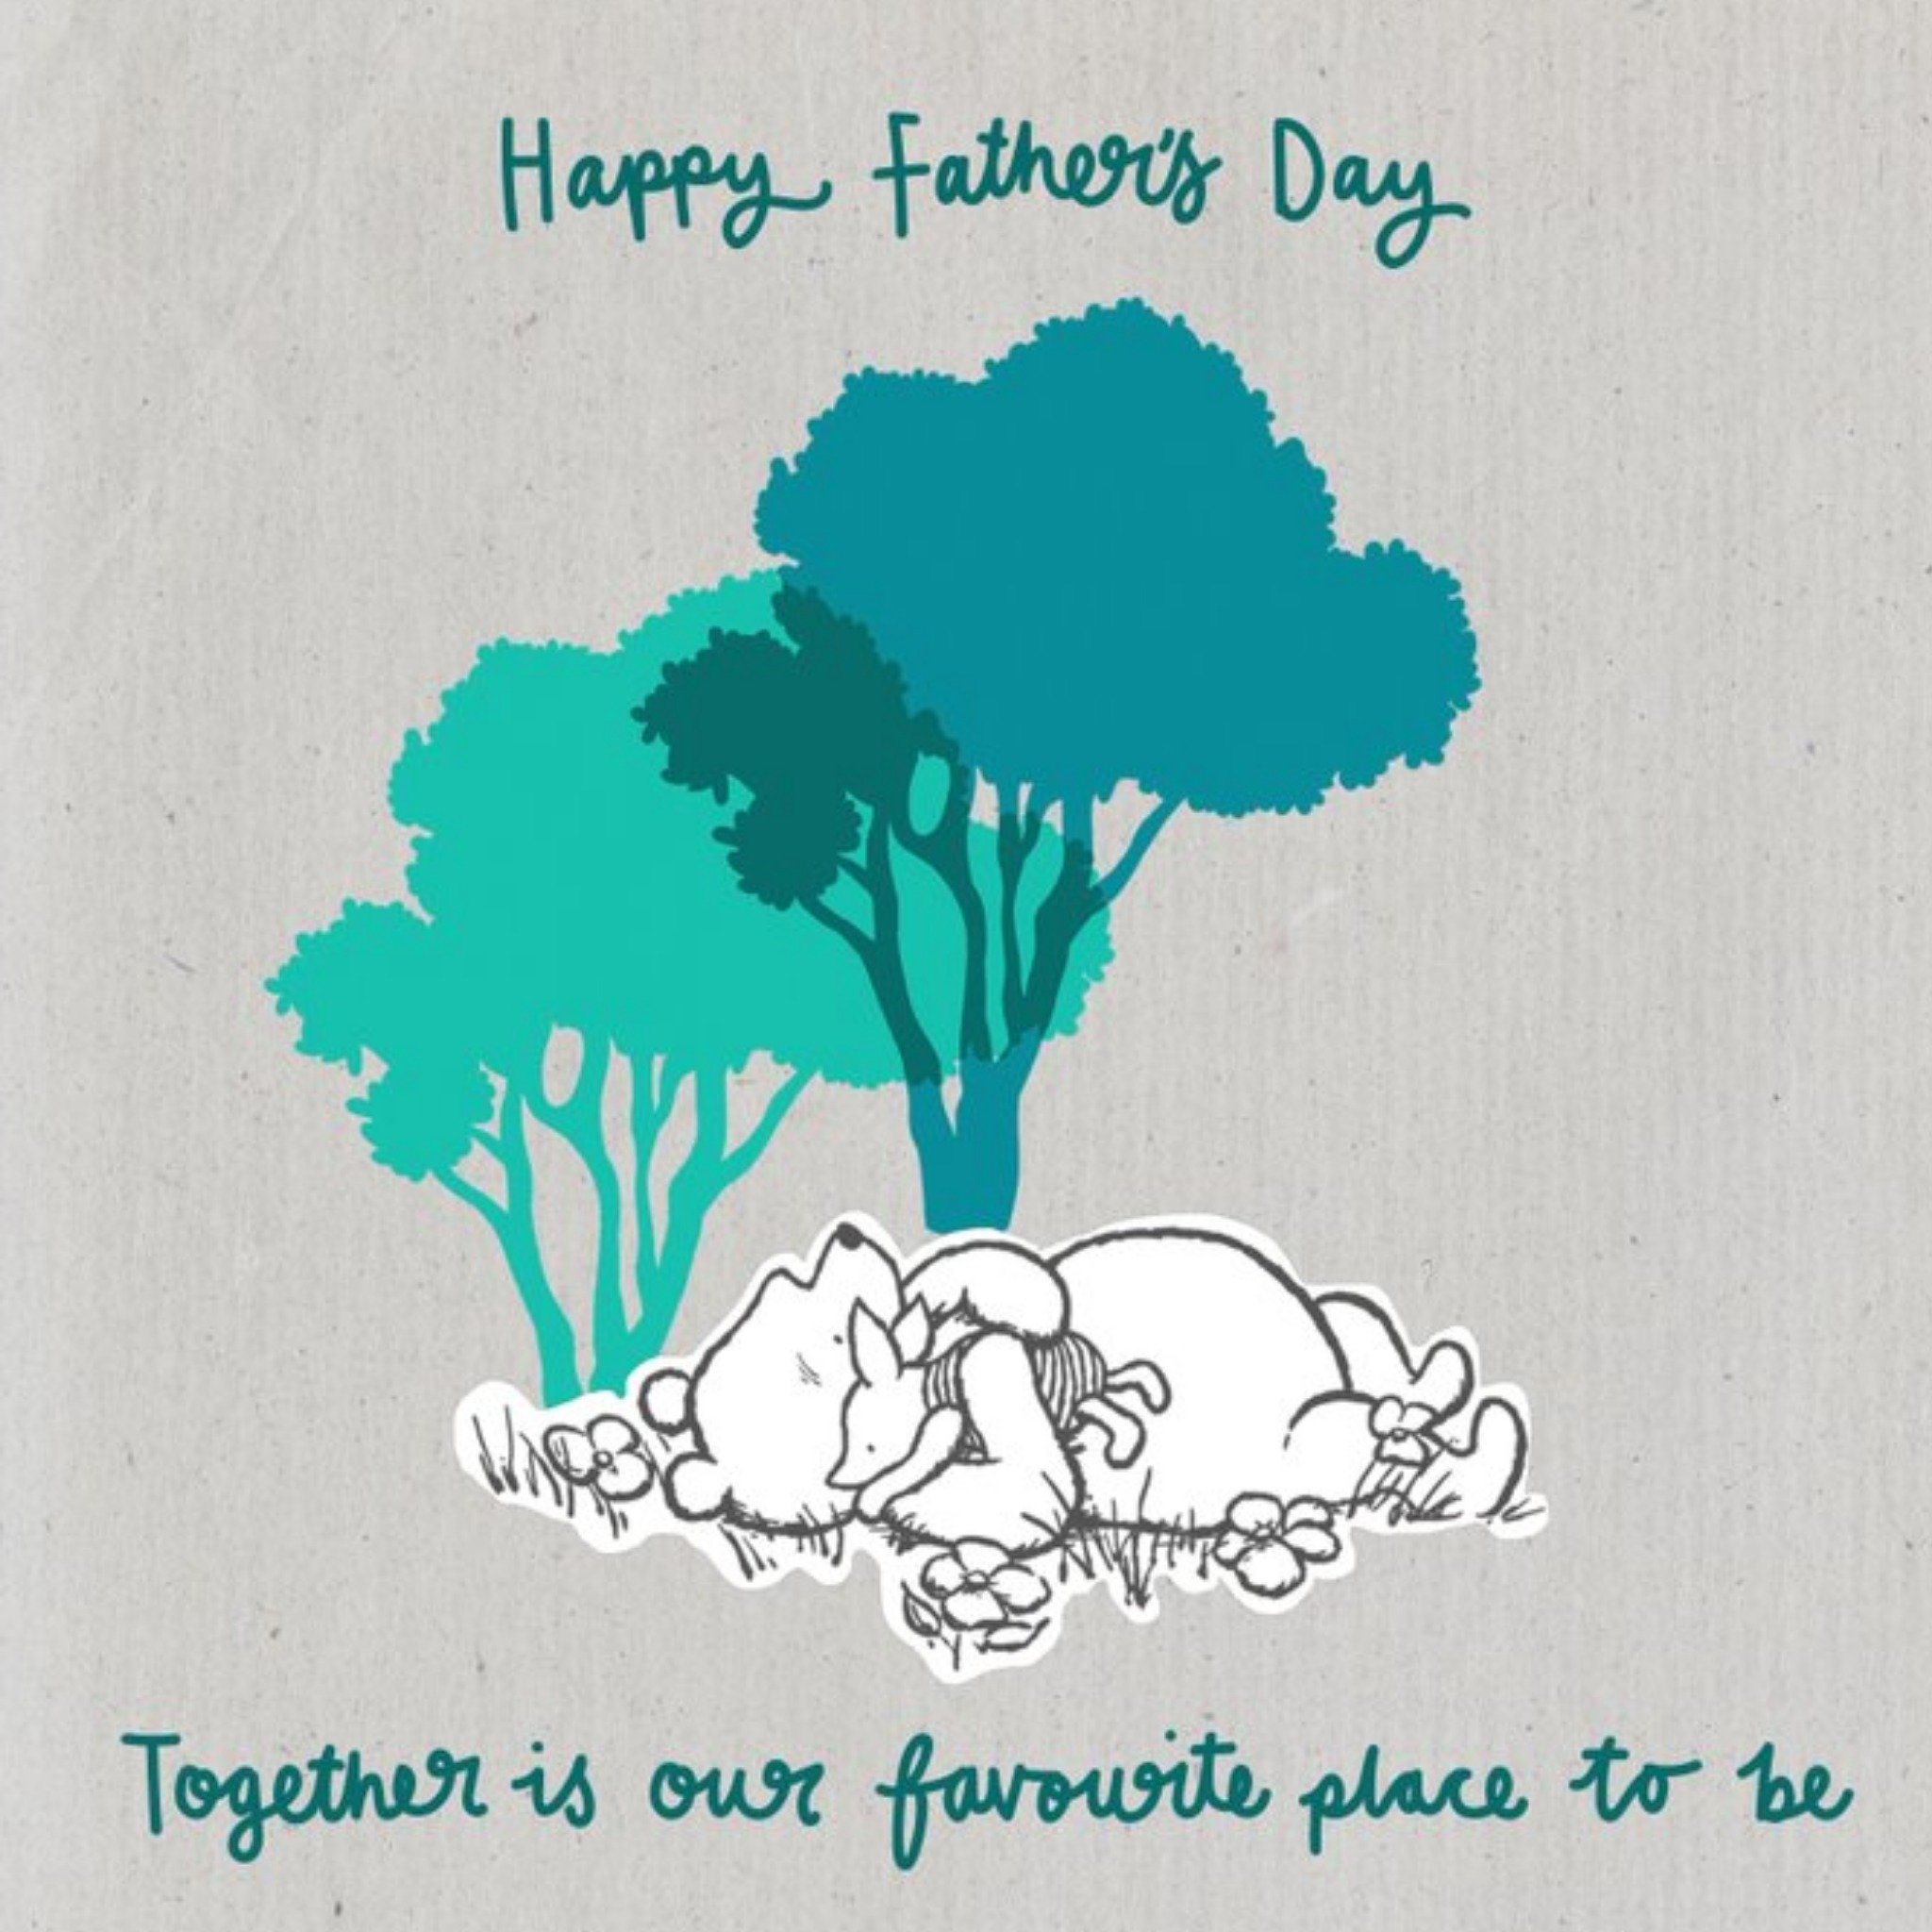 Winnie The Pooh Disney Classic Pooh Happy Fathers Day Card, Square